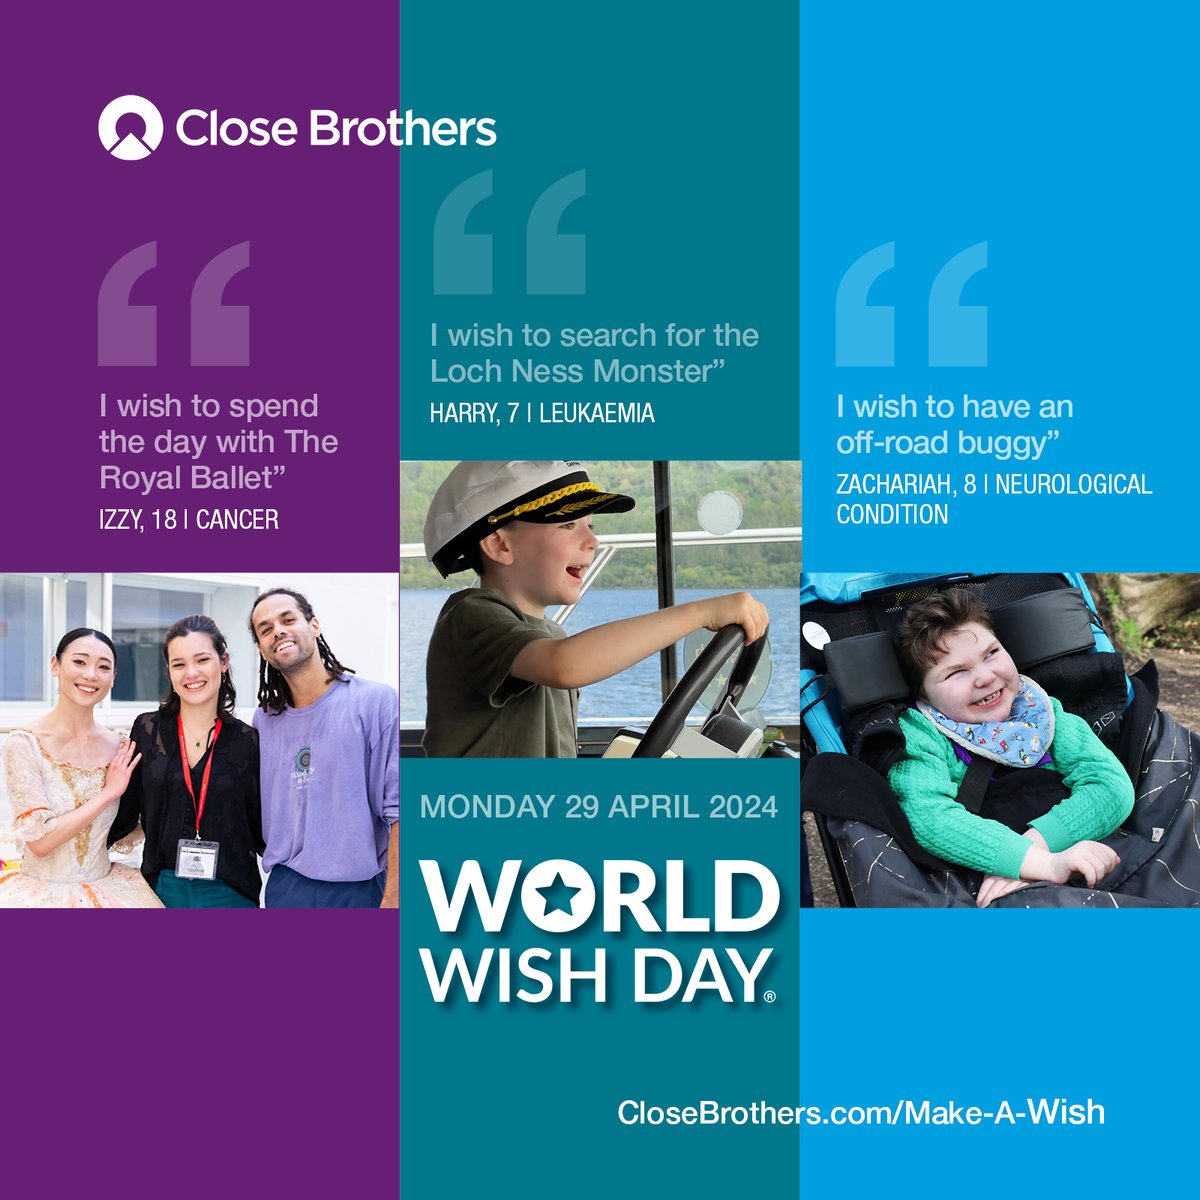 On #WorldWishDay we are proud to celebrate our partnership with @MakeAWishUK Since our partnership launched in 2019, our donations have helped grant 122 wishes for children with life threatening illnesses. Visit: closebrothers.com/our-responsibi… #CloseBrothers